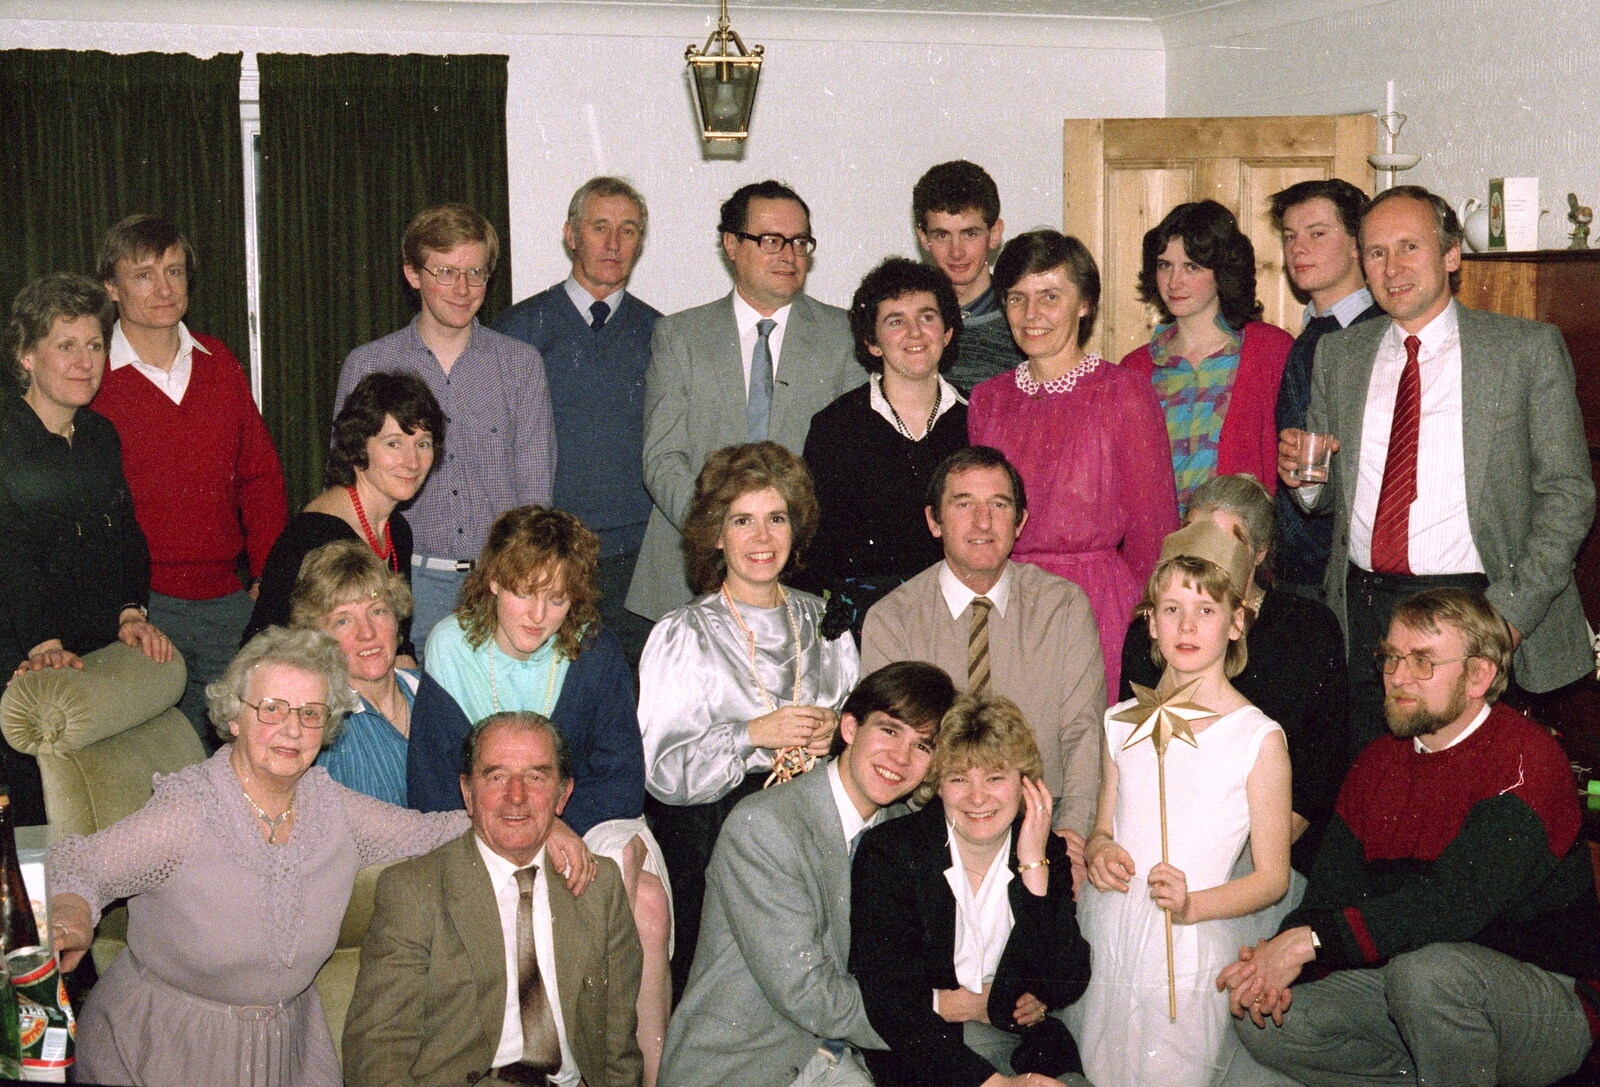 Group photo from New Year's Eve at Anna's, Walkford, Dorset - 31st December 1985